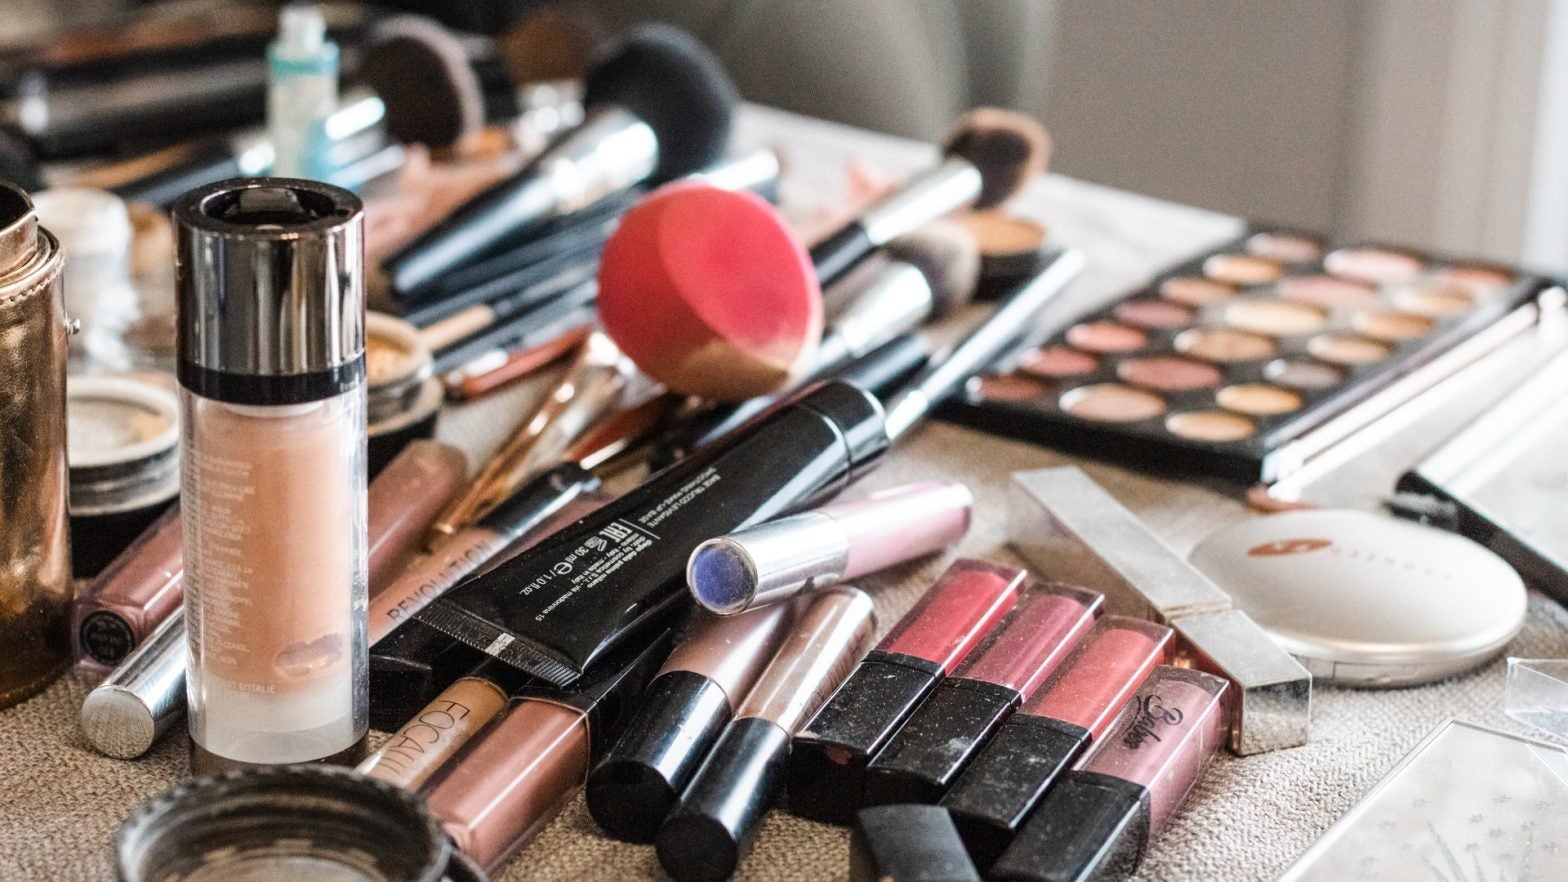 Time To Get Organized — Expert Organizer Shares How To Clean The Clutter Off Your Beauty Counter